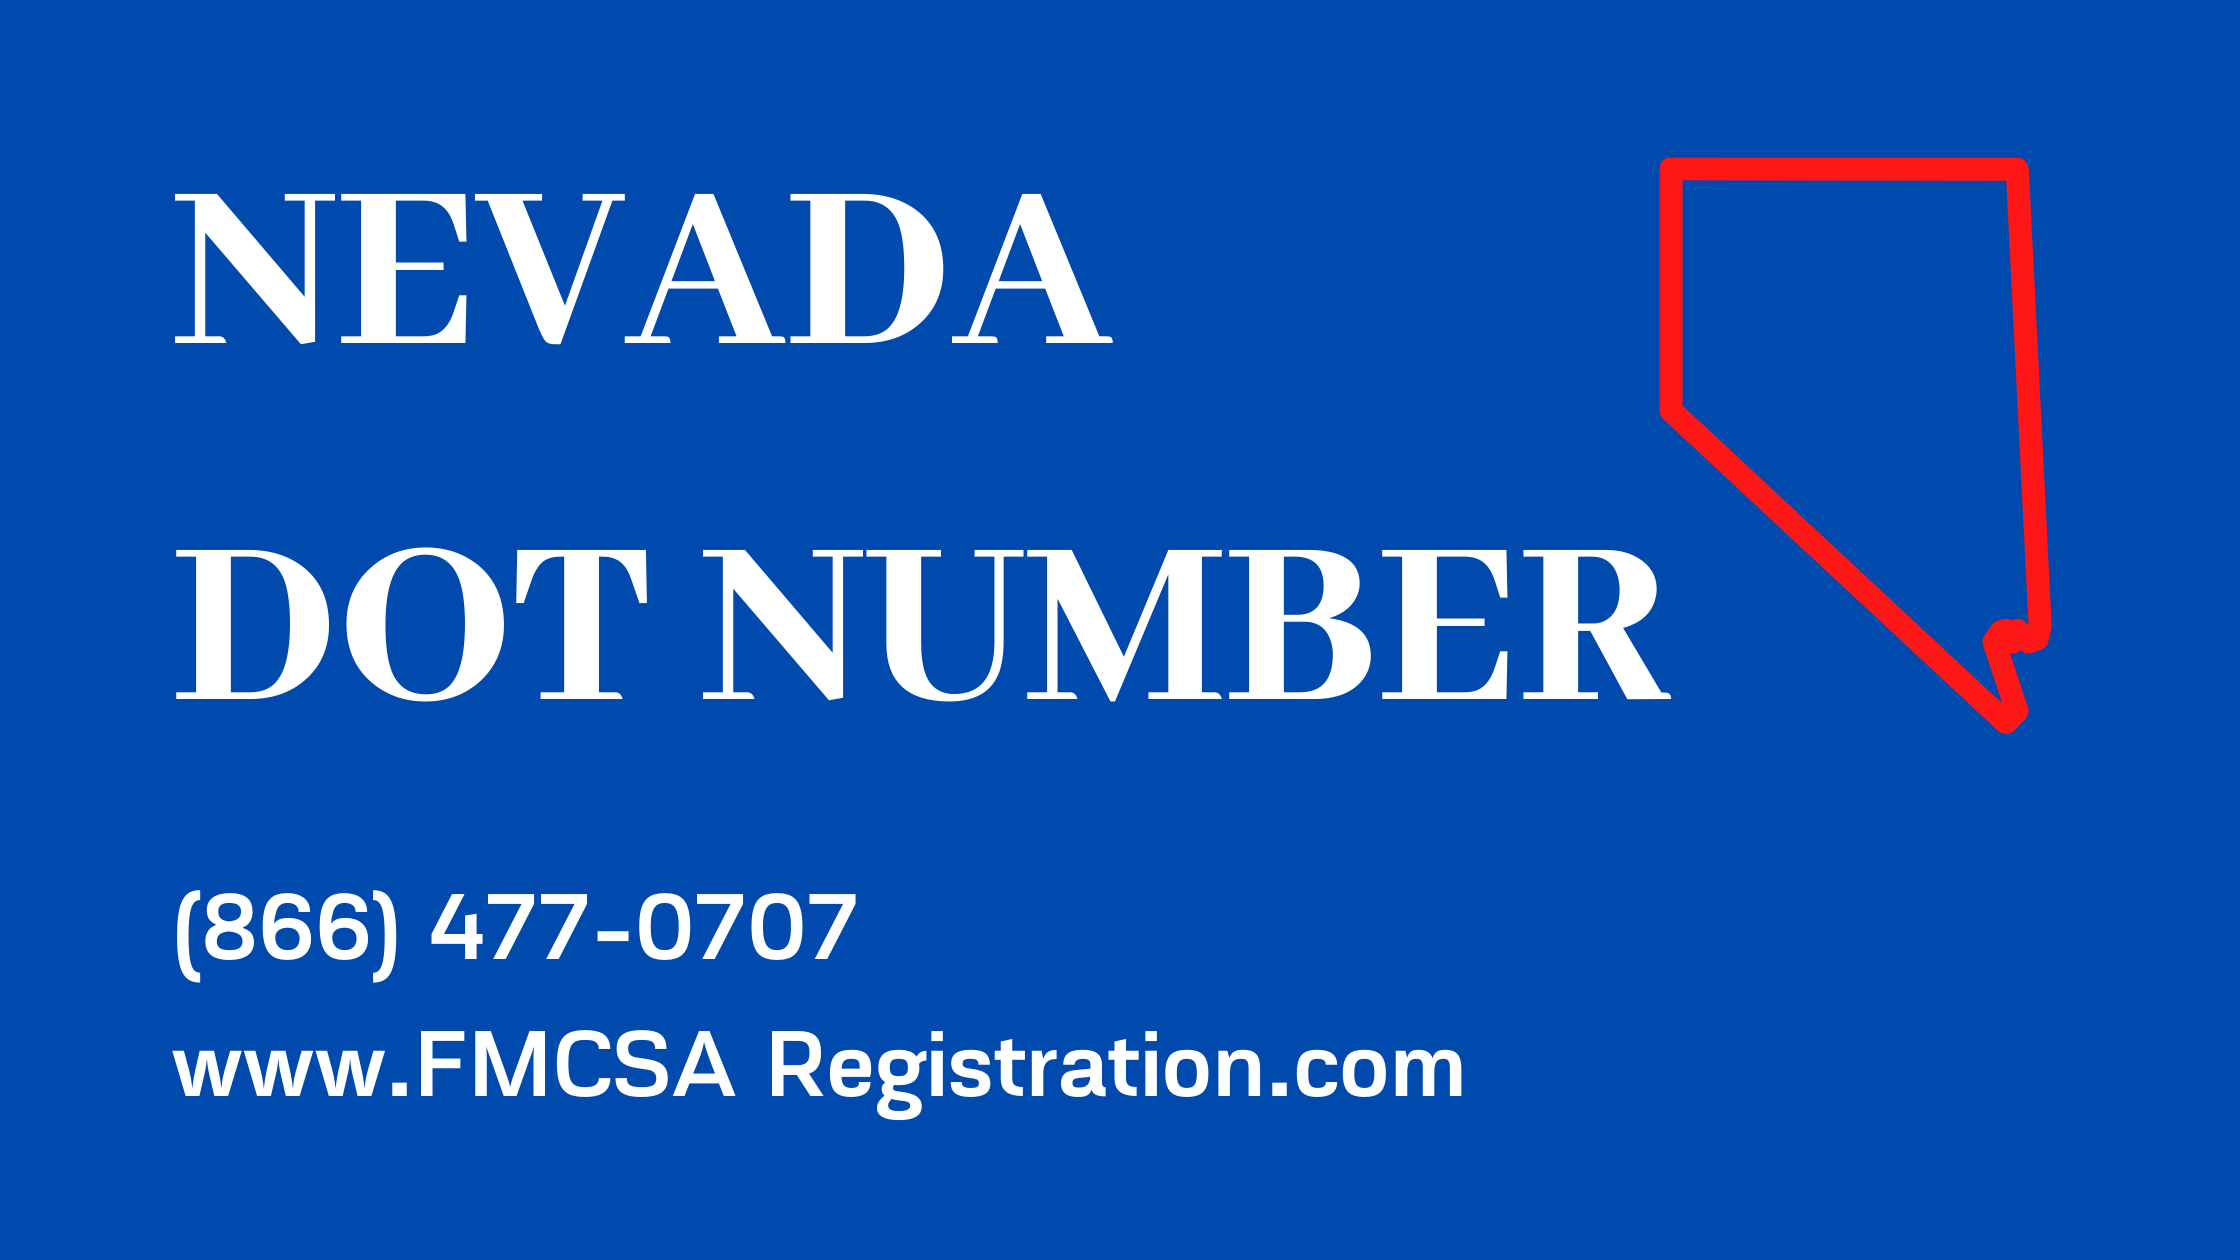 Nevada DOT Number product image reference 1